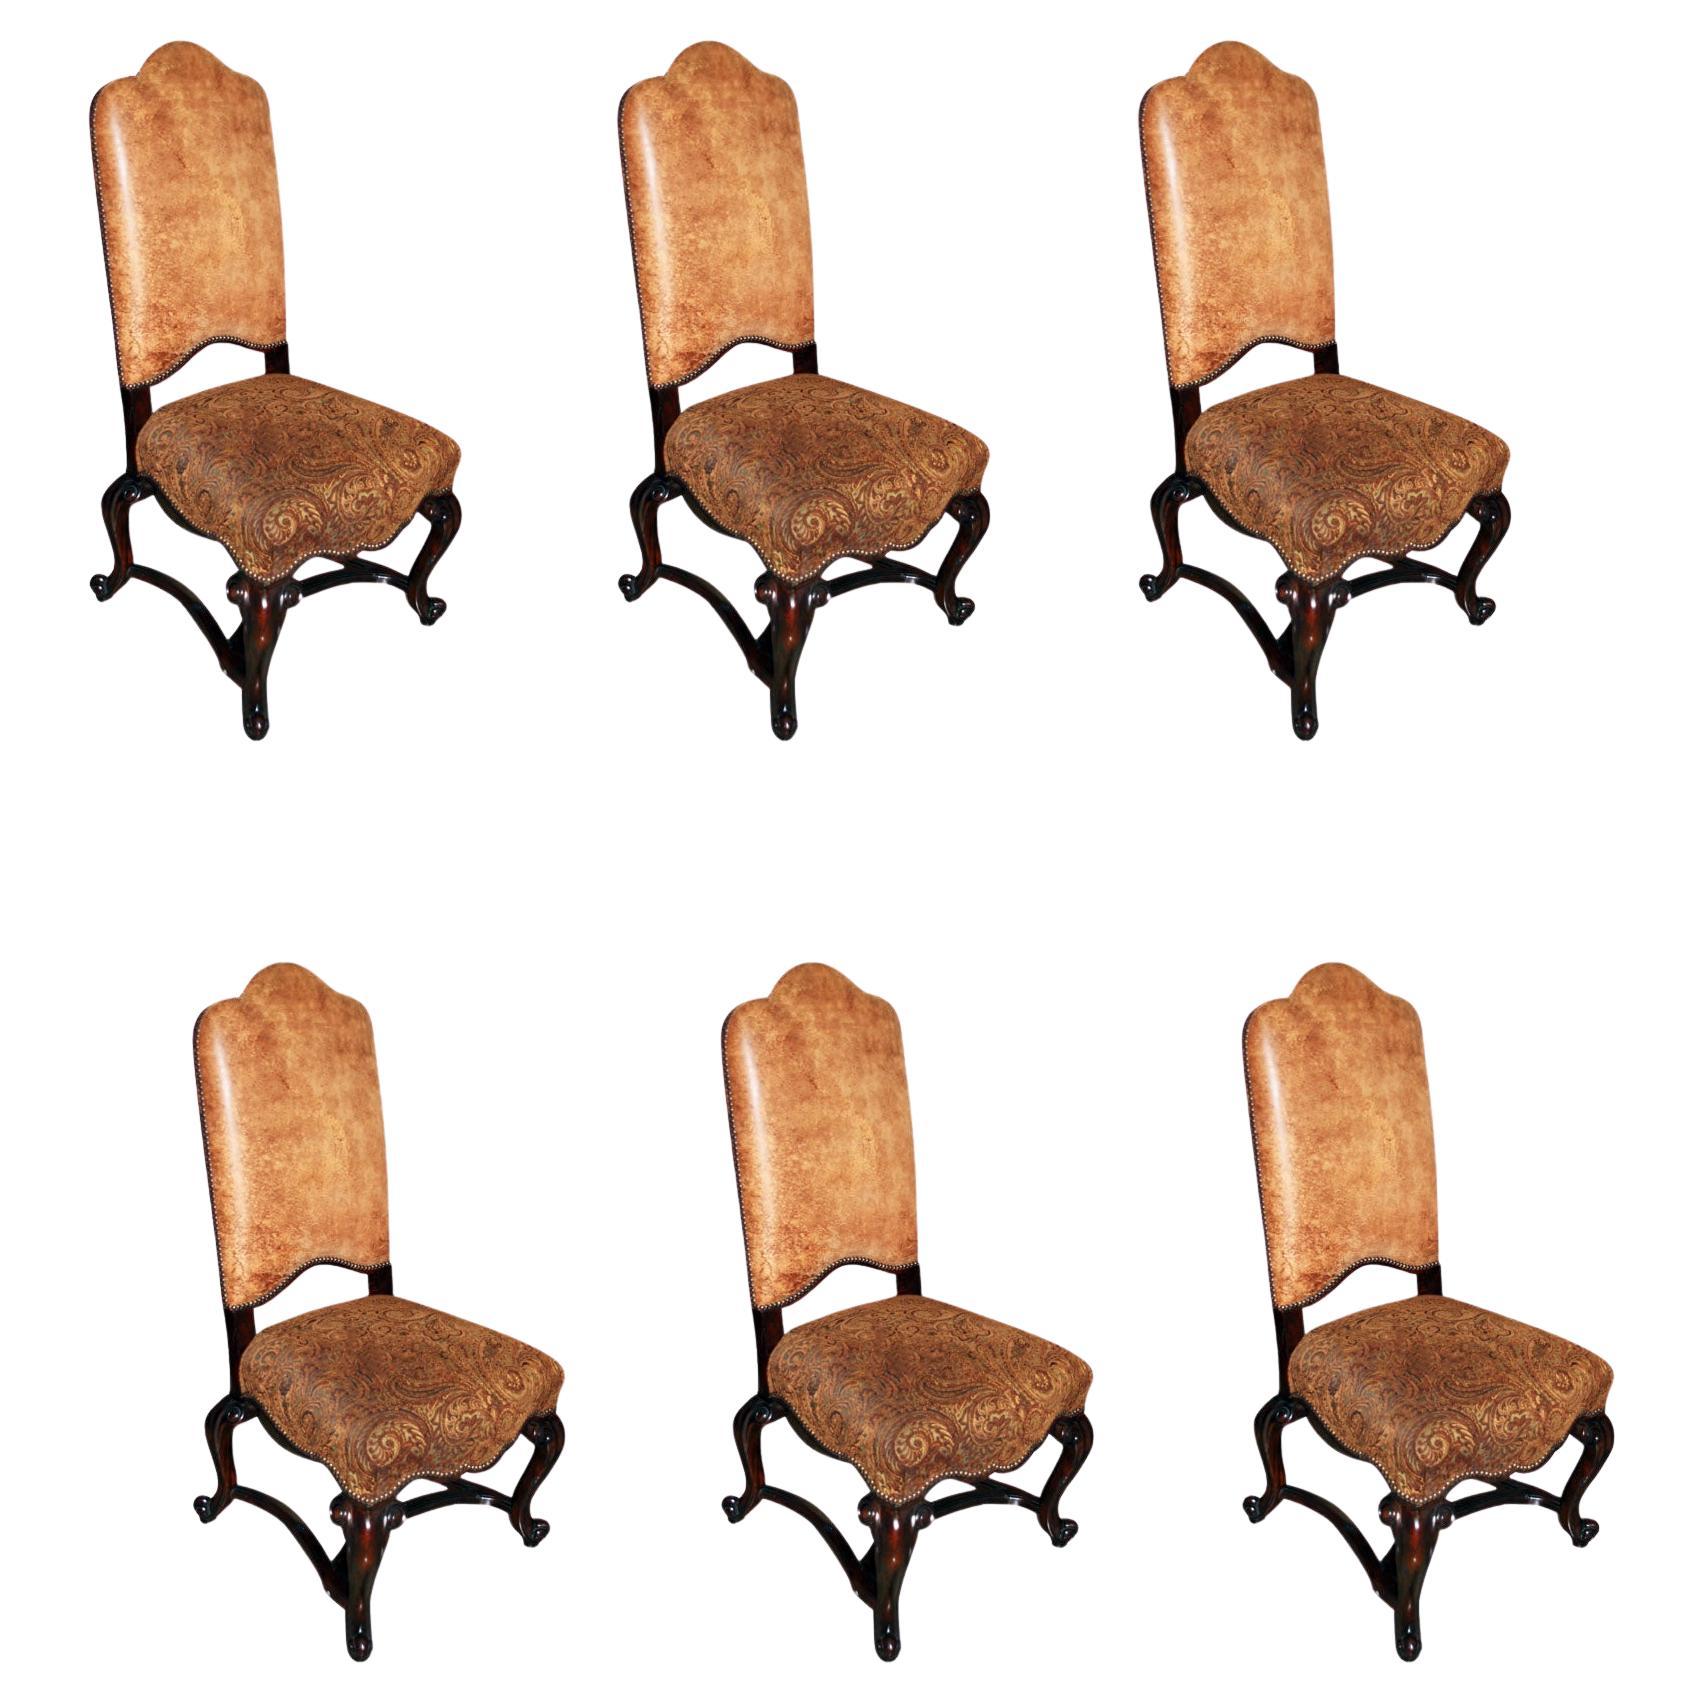 Tuscon Style Dining Chairs Set of 6